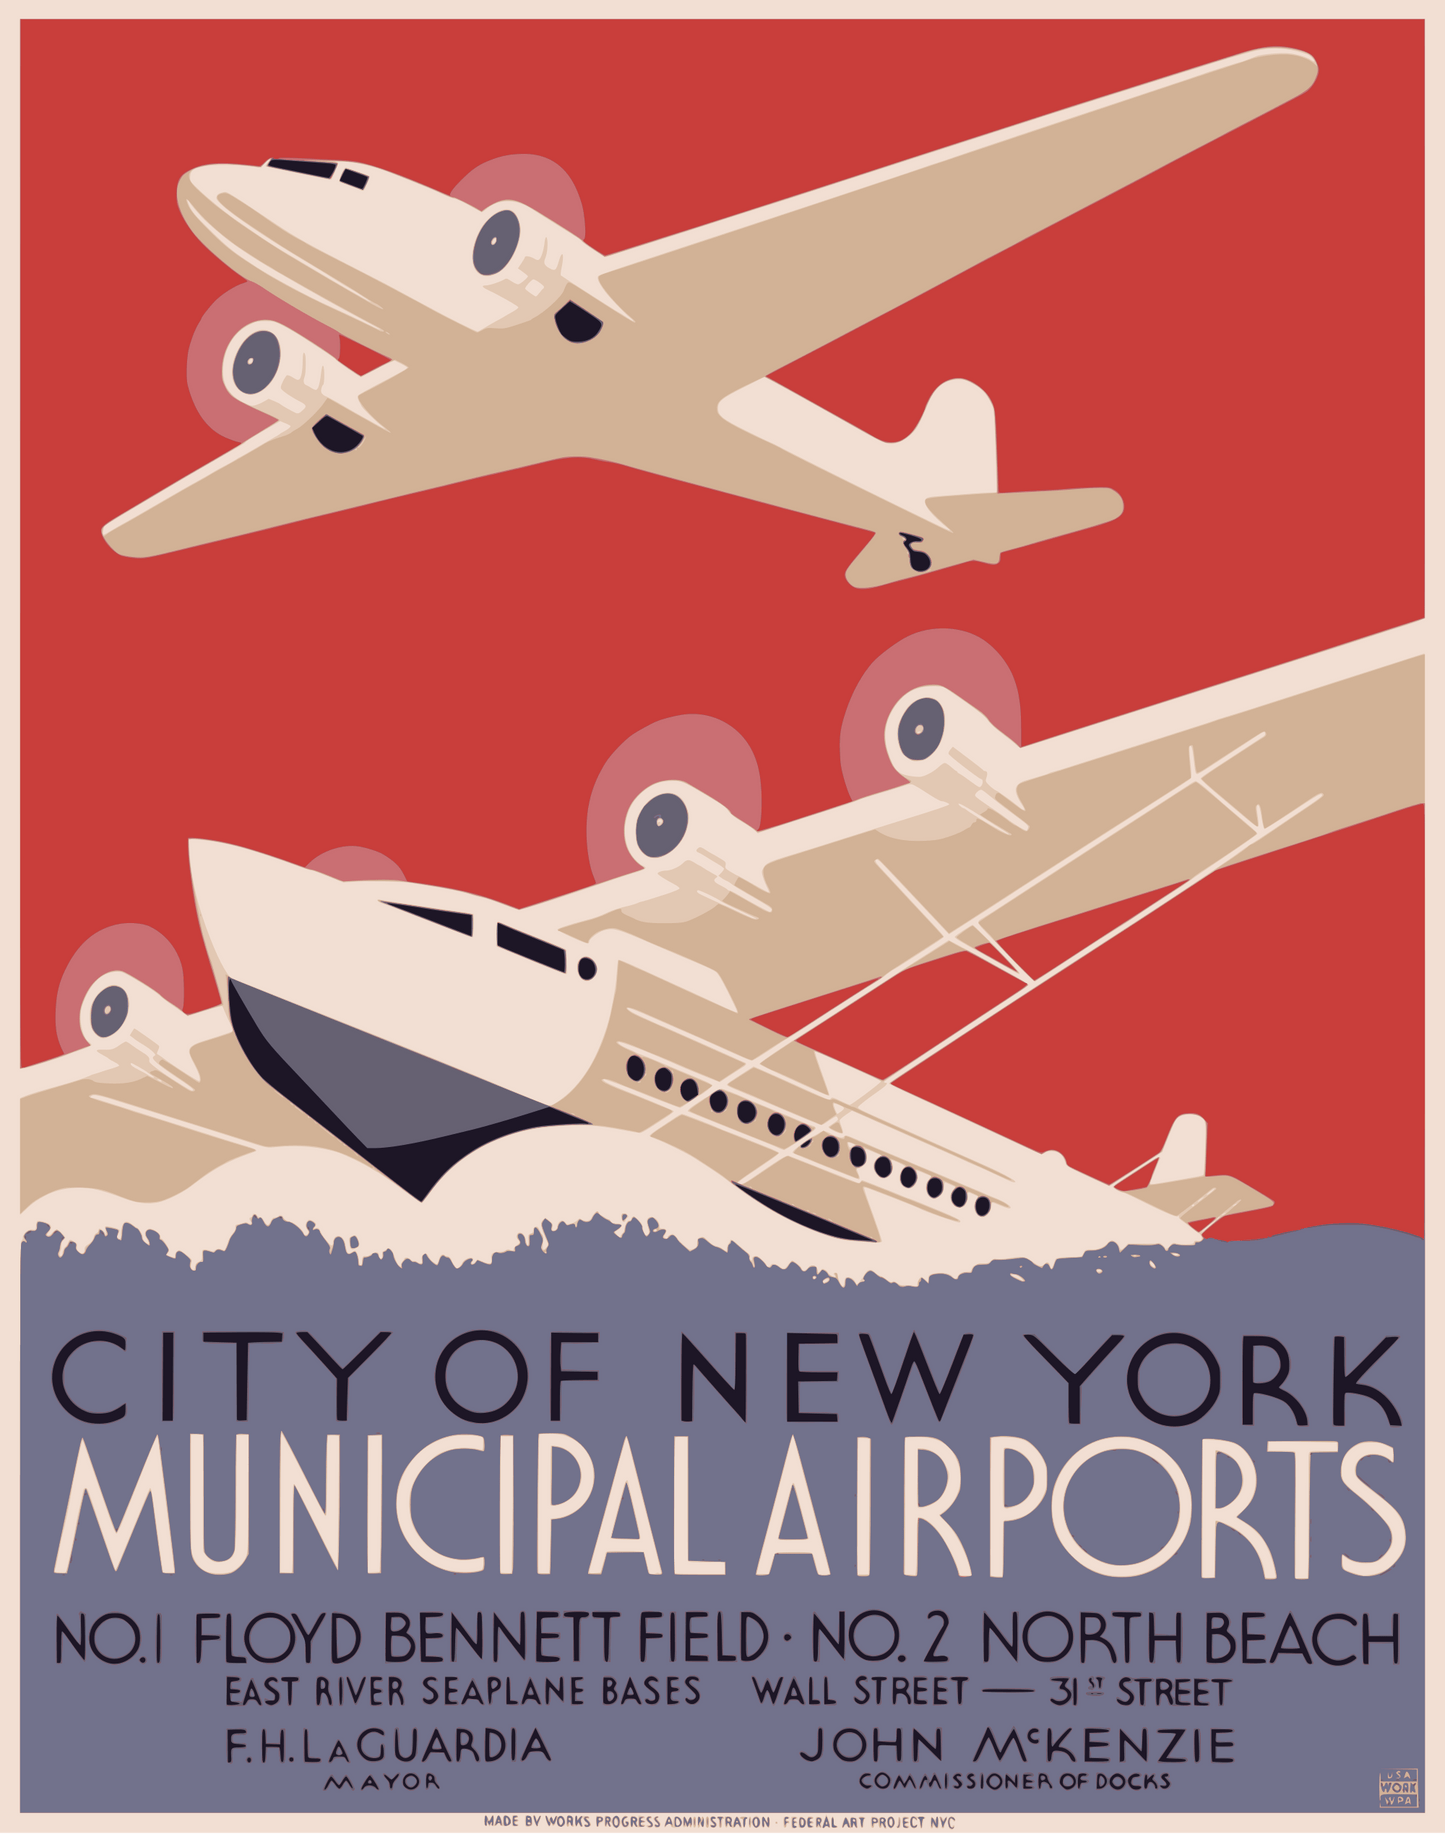 New York Airports (1930s) | Vintage New York Posters | Harry Herzog Posters, Prints, & Visual Artwork The Trumpet Shop   